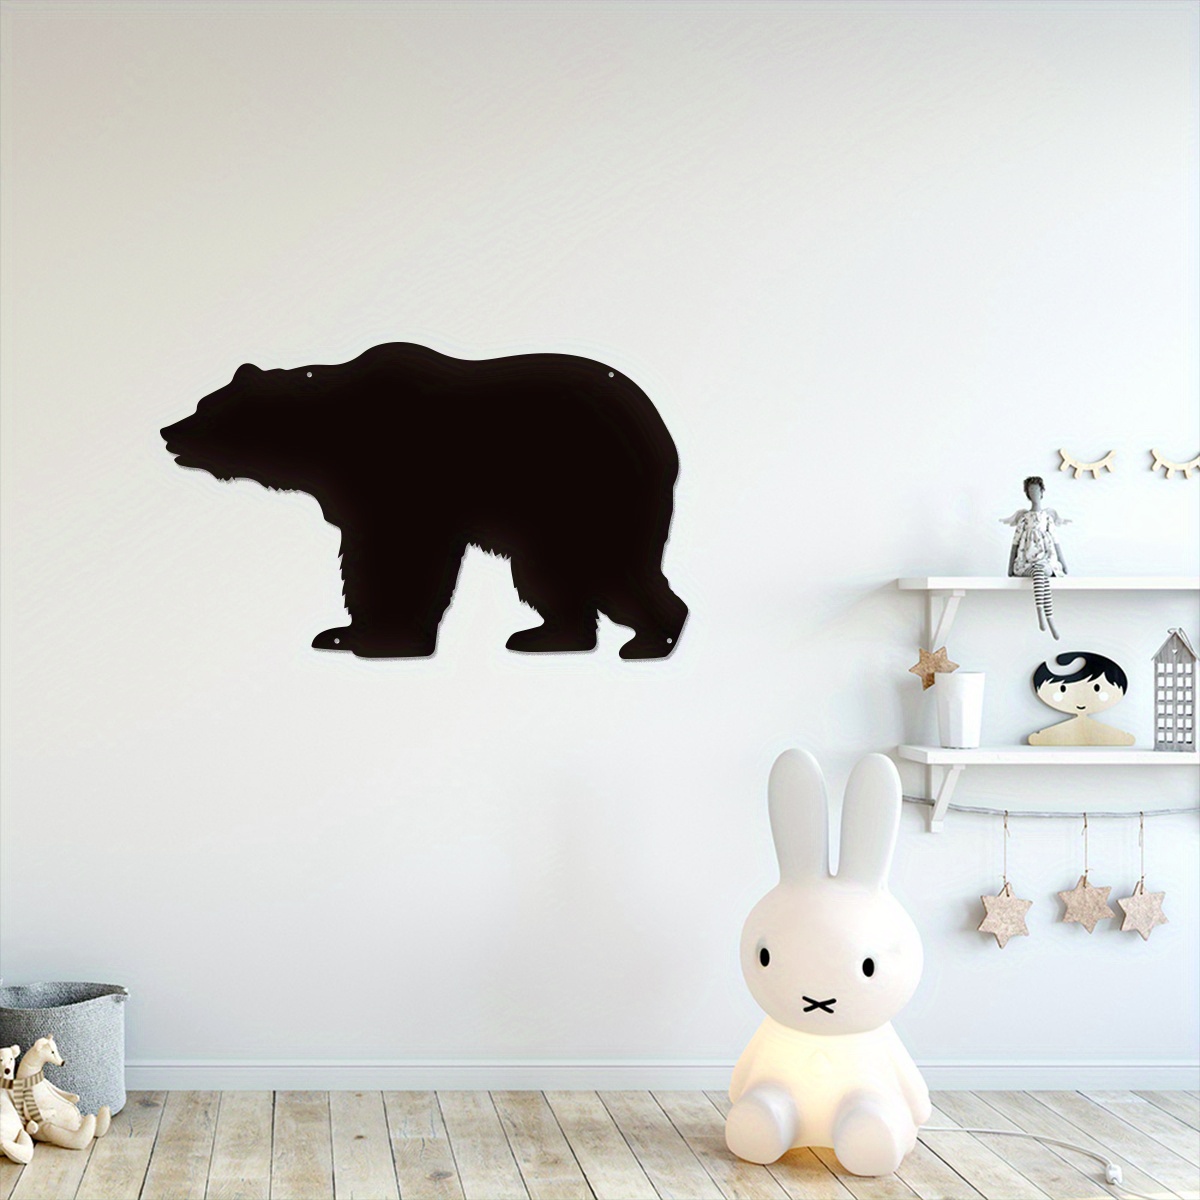 

1pc Bear Metal Wall Art, Metal Bear Decor, Country Cut Metal Wall Decor For Home Bedroom Office Outdoor Living Room Bedroom Background Wall Art, Wildlife Lover Gifts, Metal Art Work